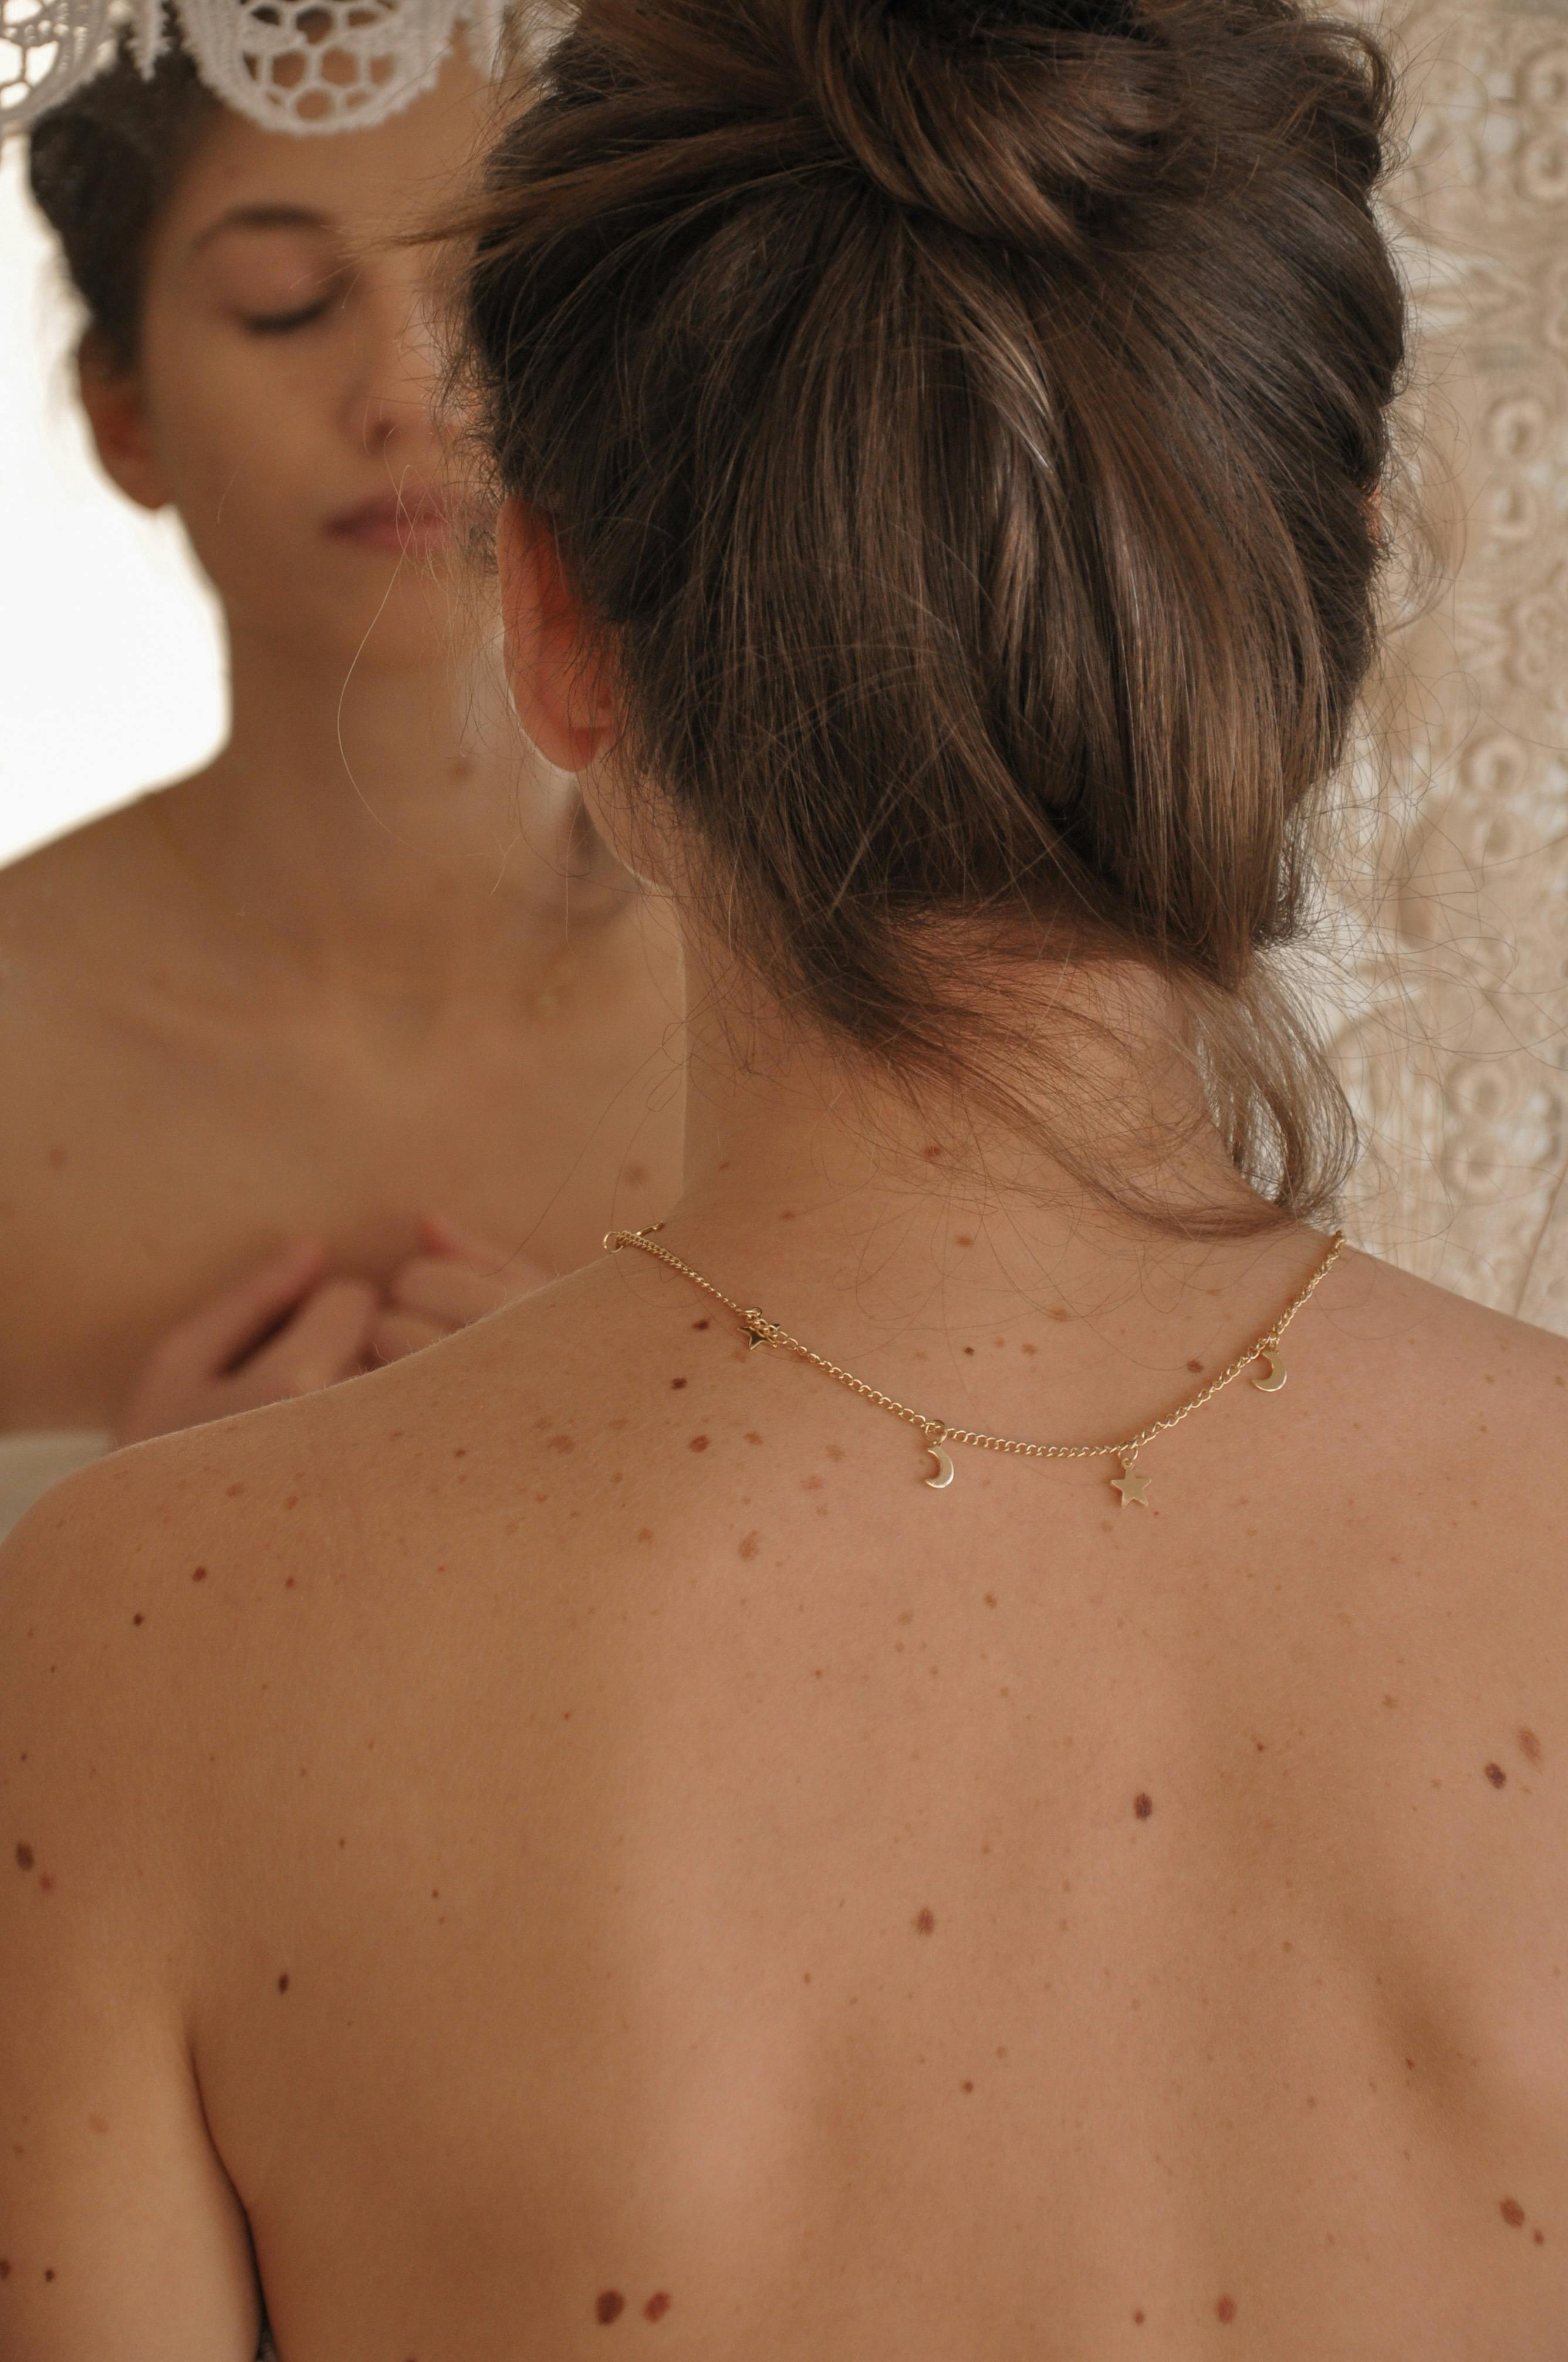 woman with bare skin and thin necklace on neck